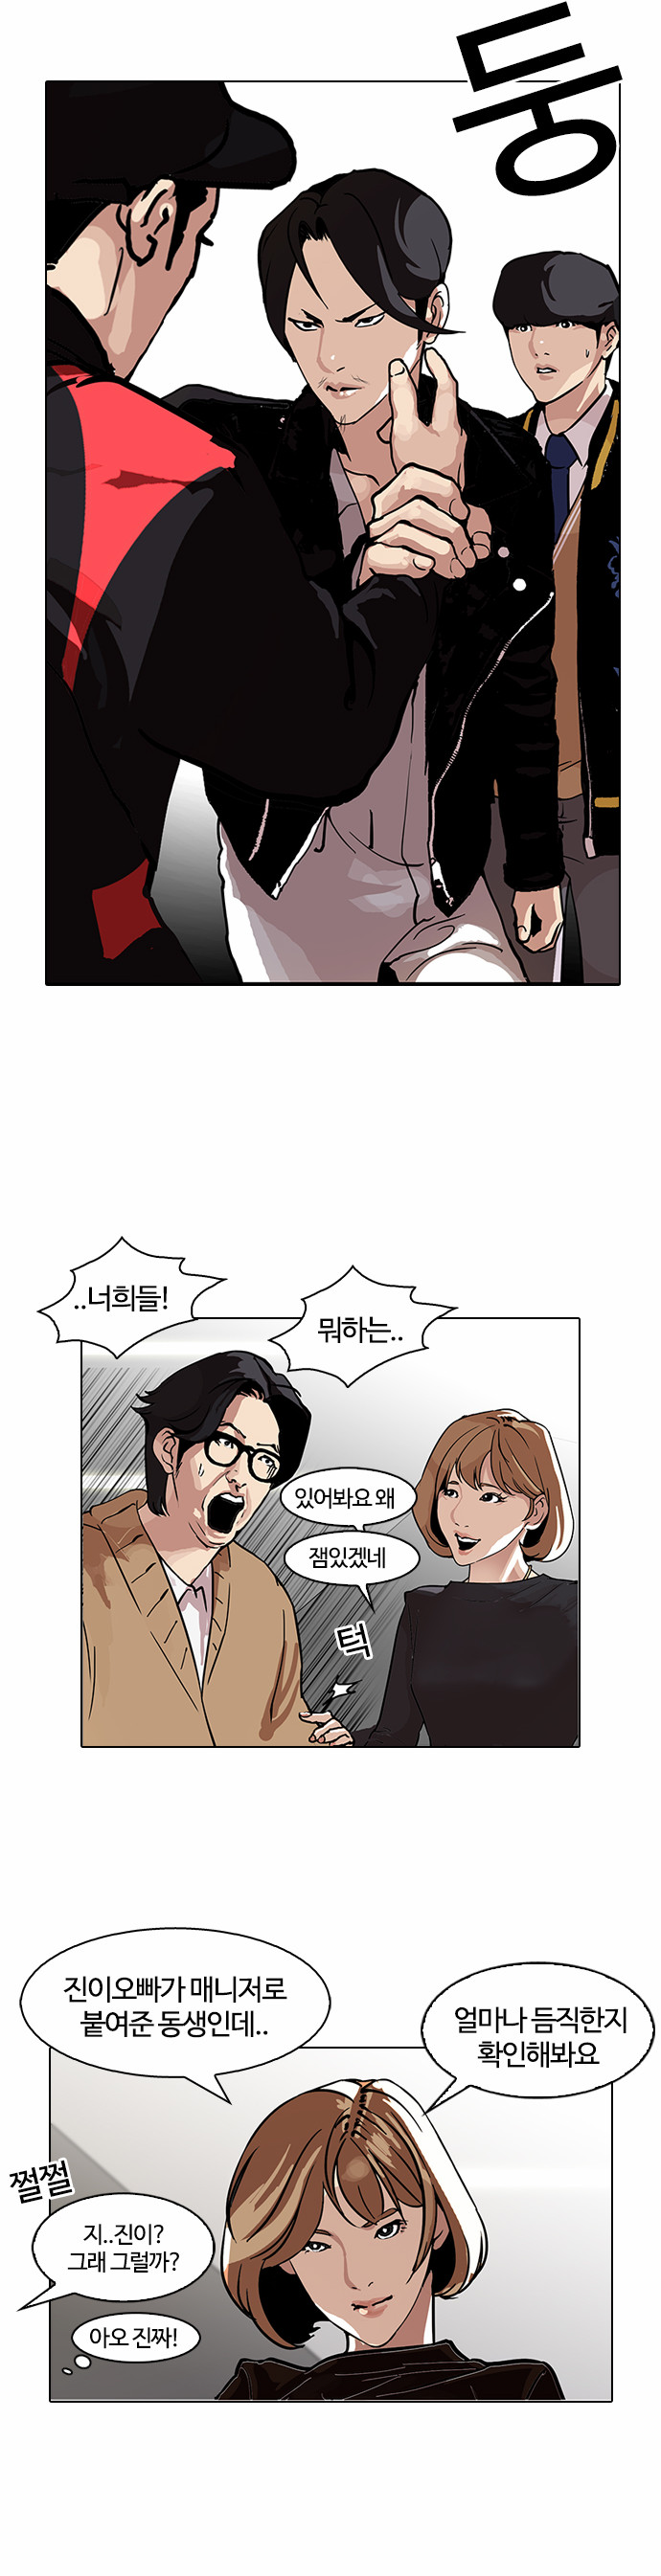 Lookism - Chapter 105 - Page 2